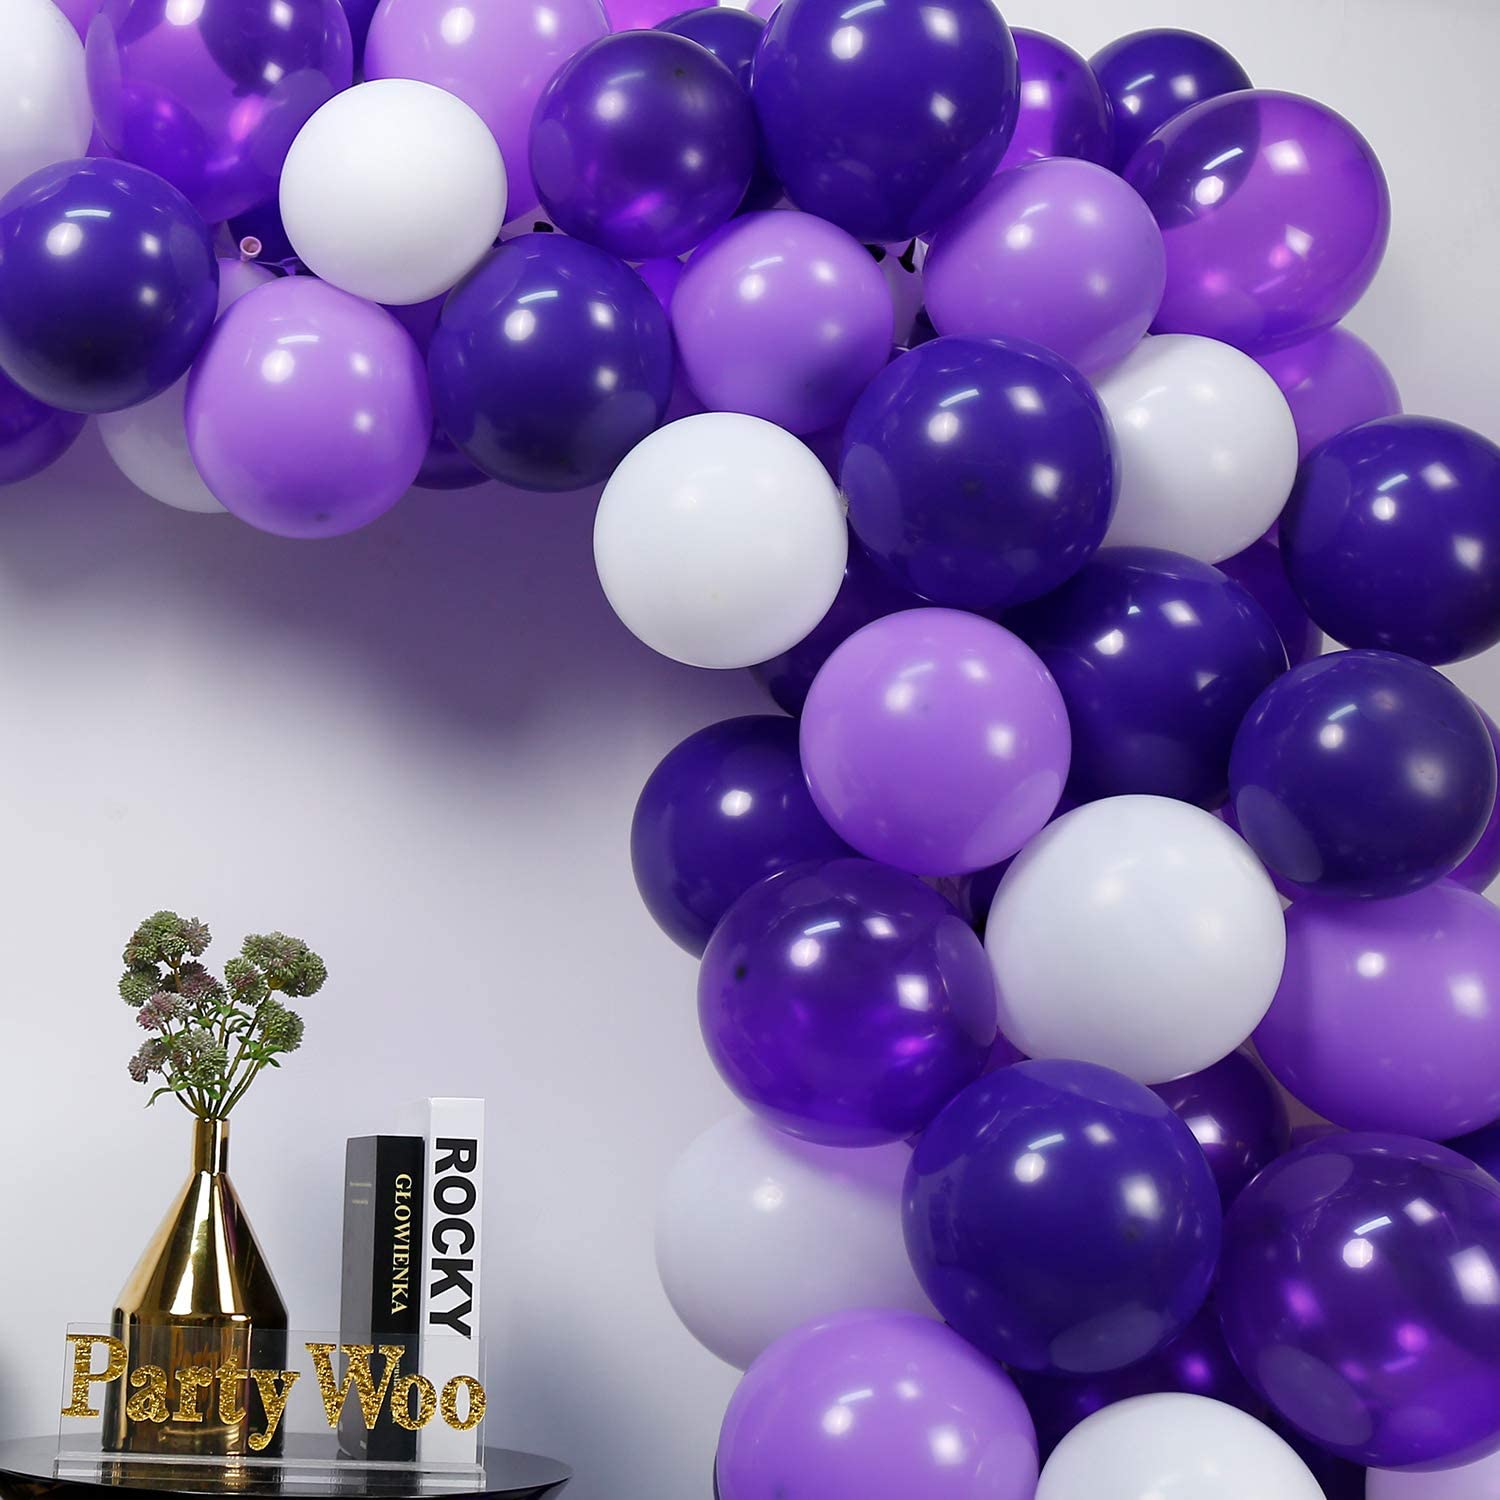 PartyWoo Royal Purple Balloons, 55 pcs 12 Inch Purple Balloons, Latex  Balloons for Balloon Garland Balloon Arch as Party Decorations, Birthday  Decorations, Wedding Decorations, Baby Shower Decorations